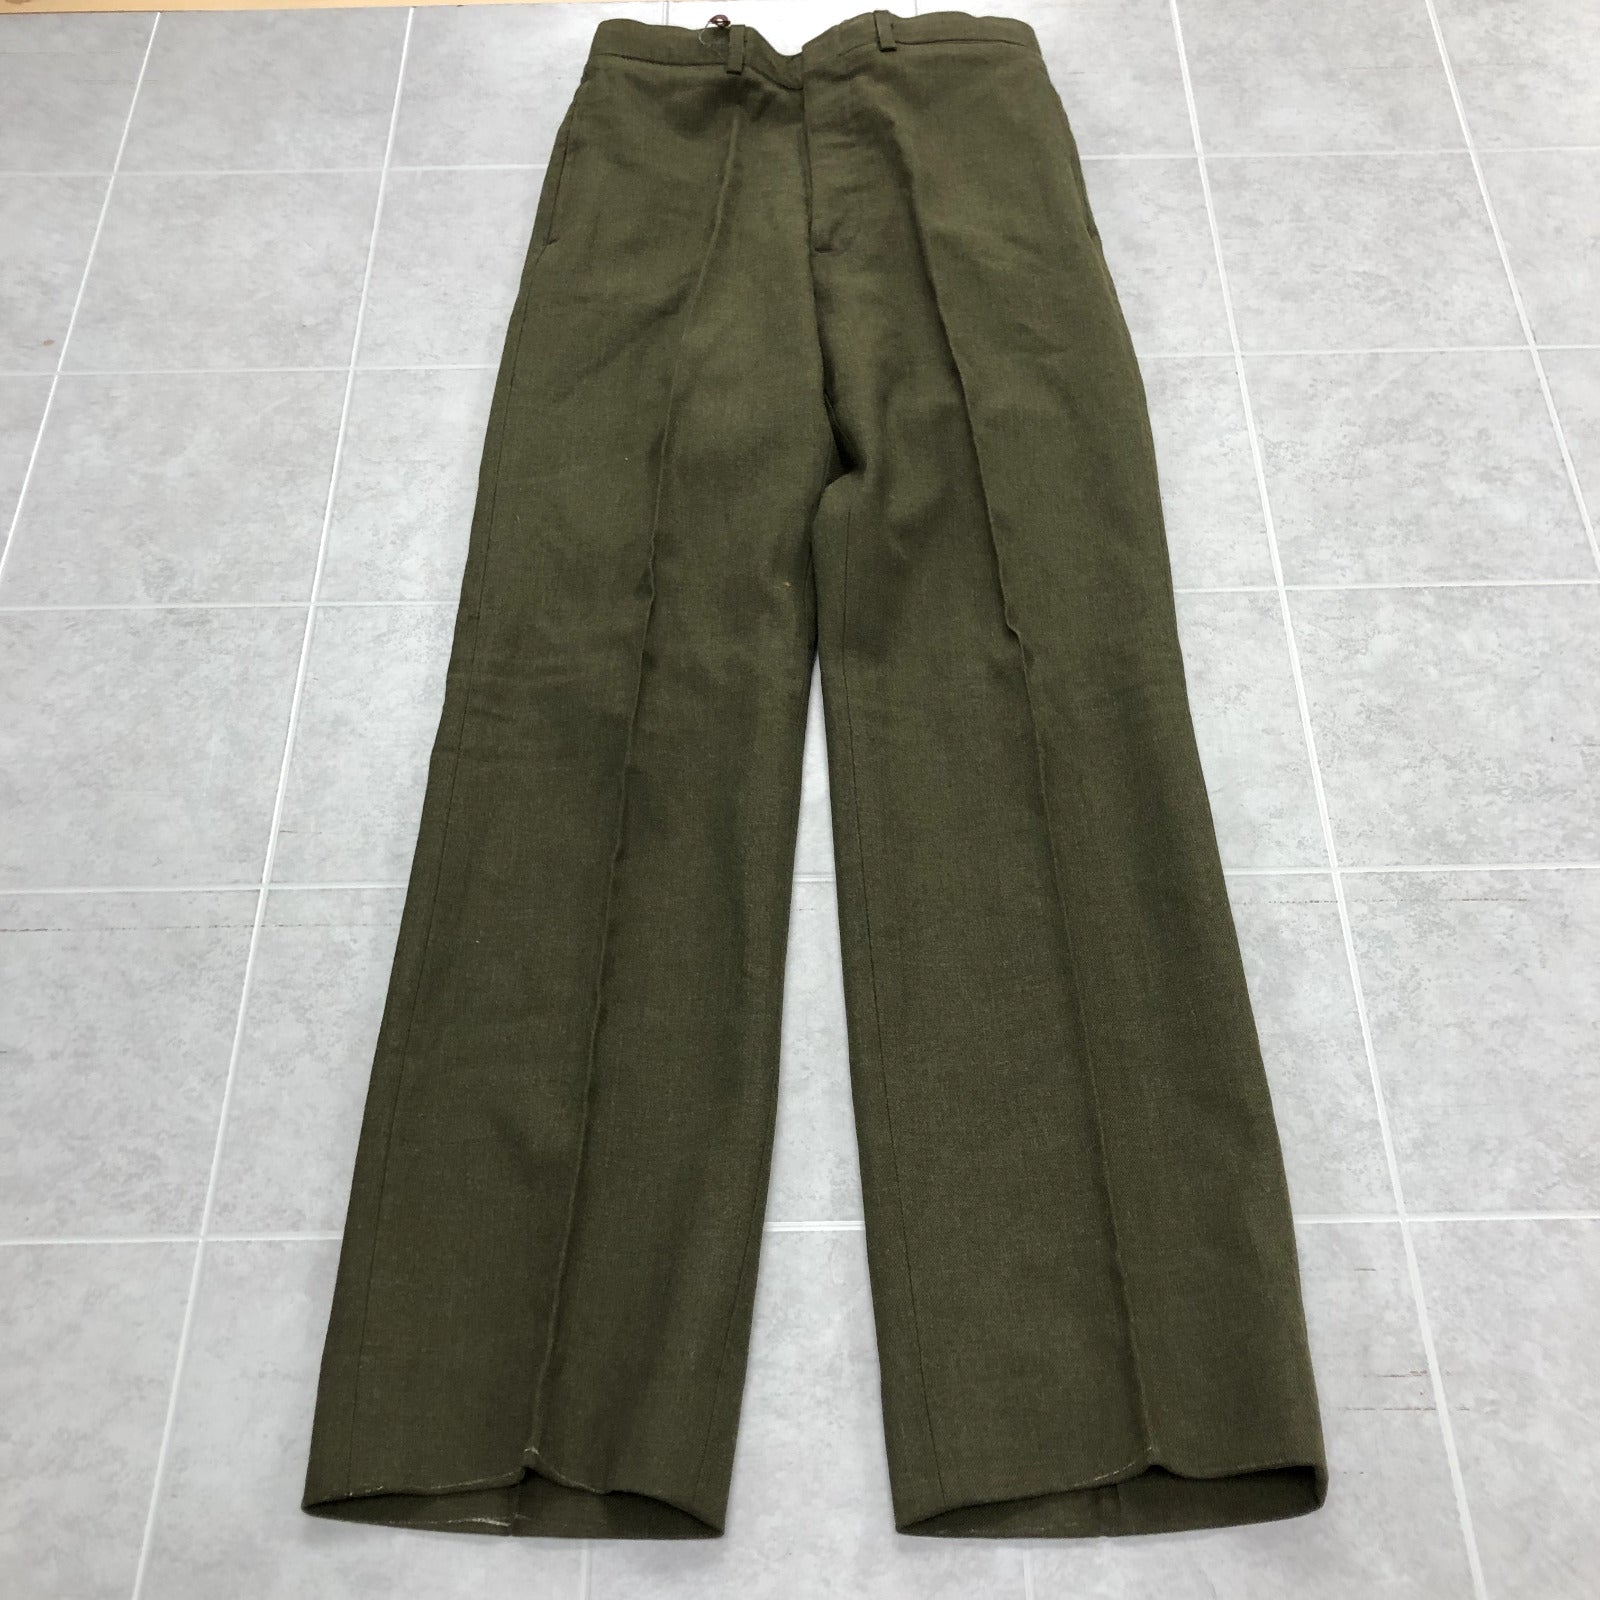 Vintage US Military Green Straight High-Rise Flat Front Slacks Adult Size 30R